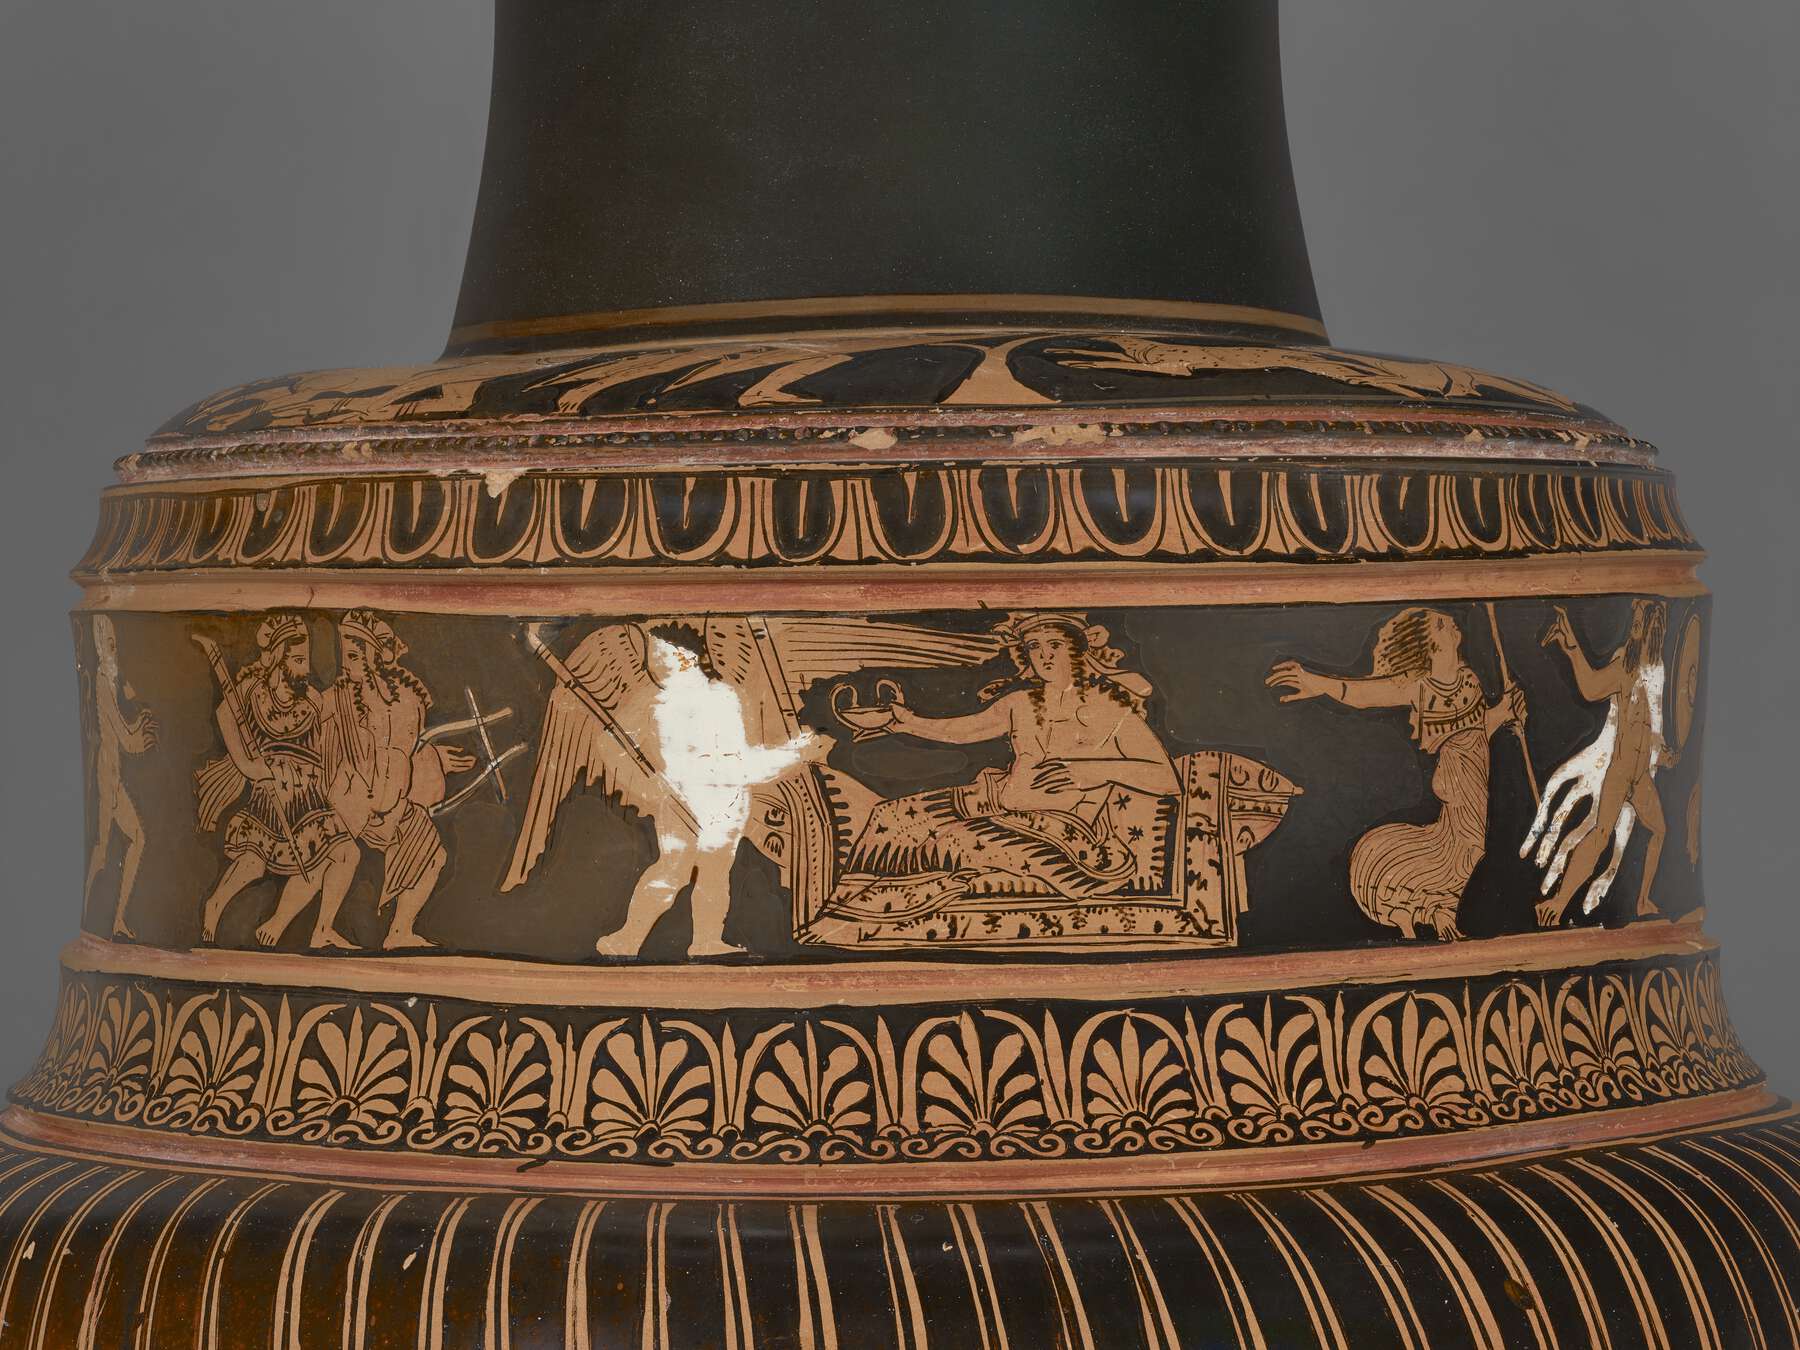 Another detail of the foot of the vase, with some white showing and all the people in motion